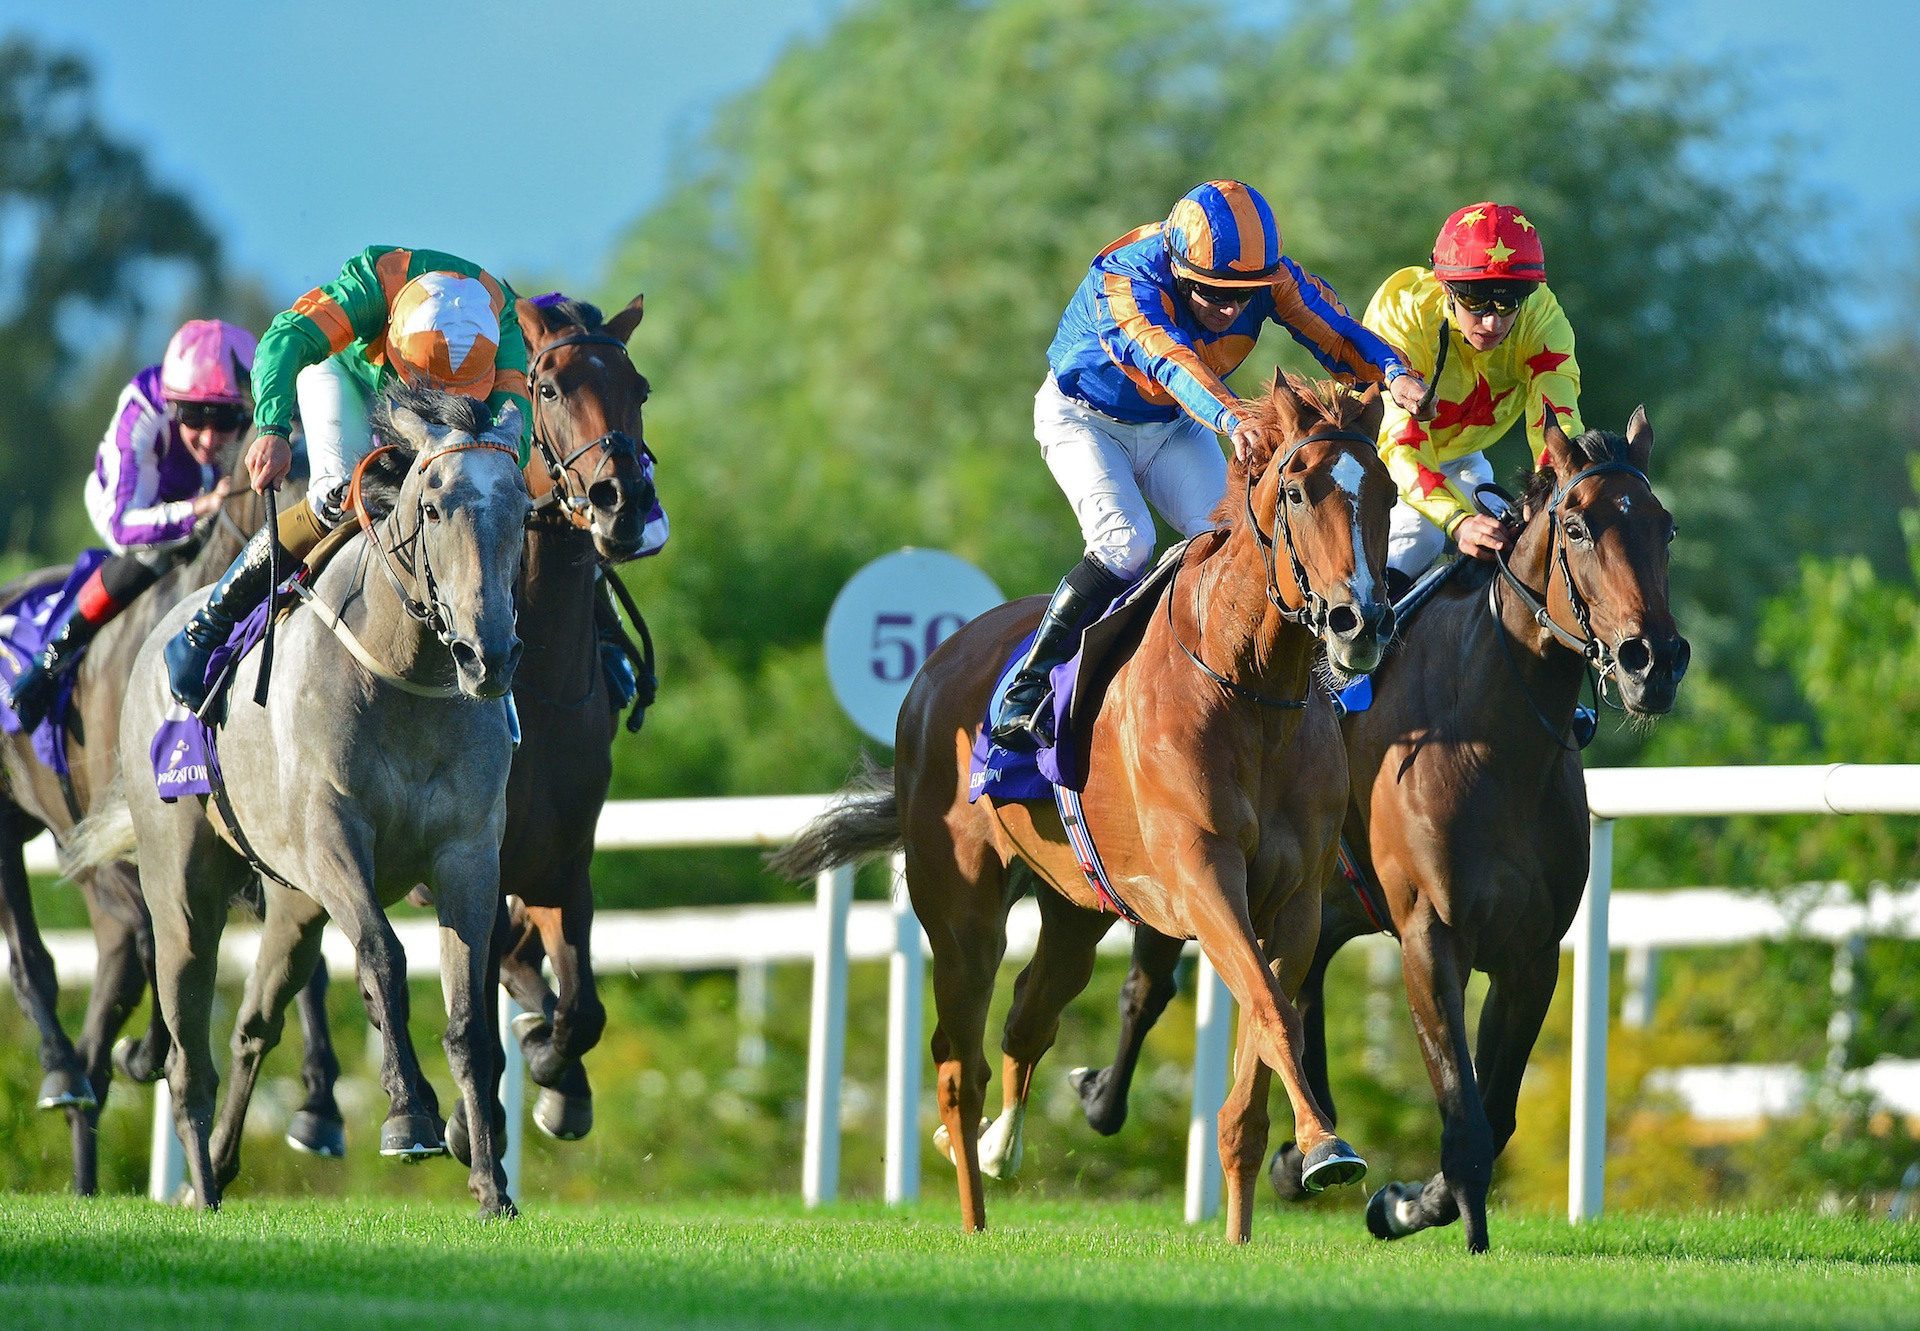 Peach Tree (Galileo) wins the Group 3 Stanerra Stakes at Leopardstown